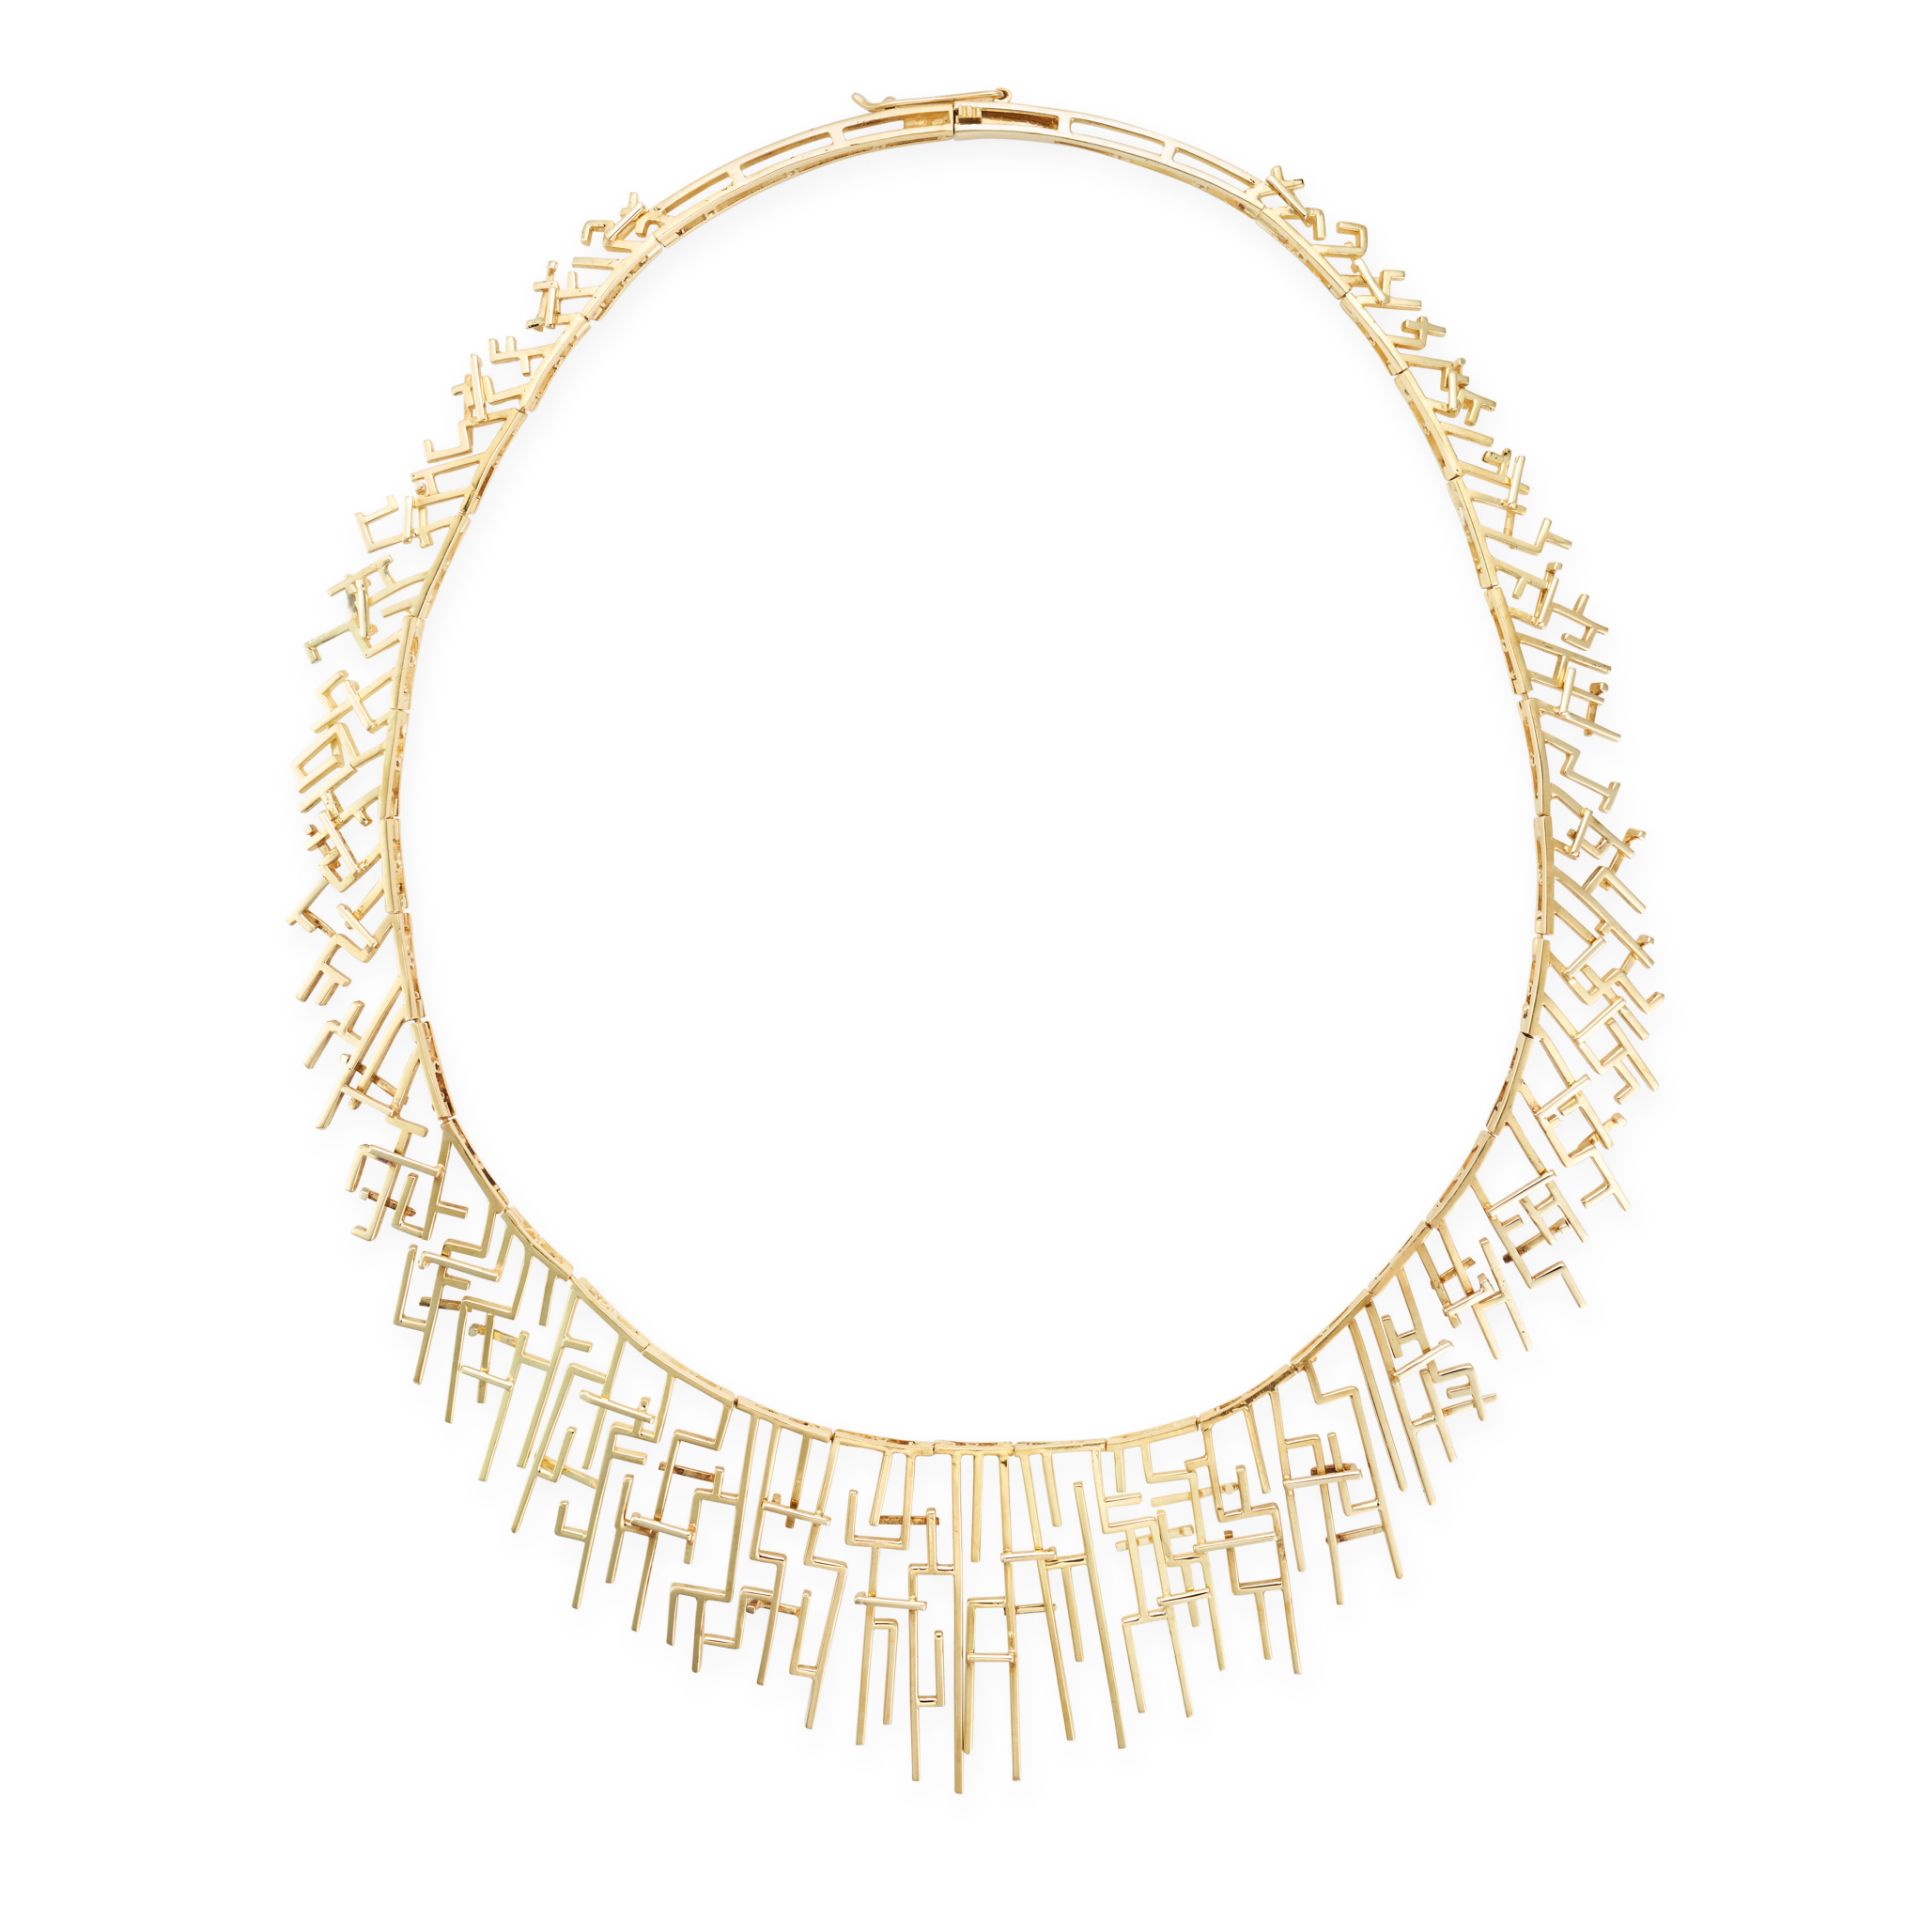 A MODERNIST GOLD BIB NECKLACE in 18ct yellow gold, the graduating necklace comprising abstract li...